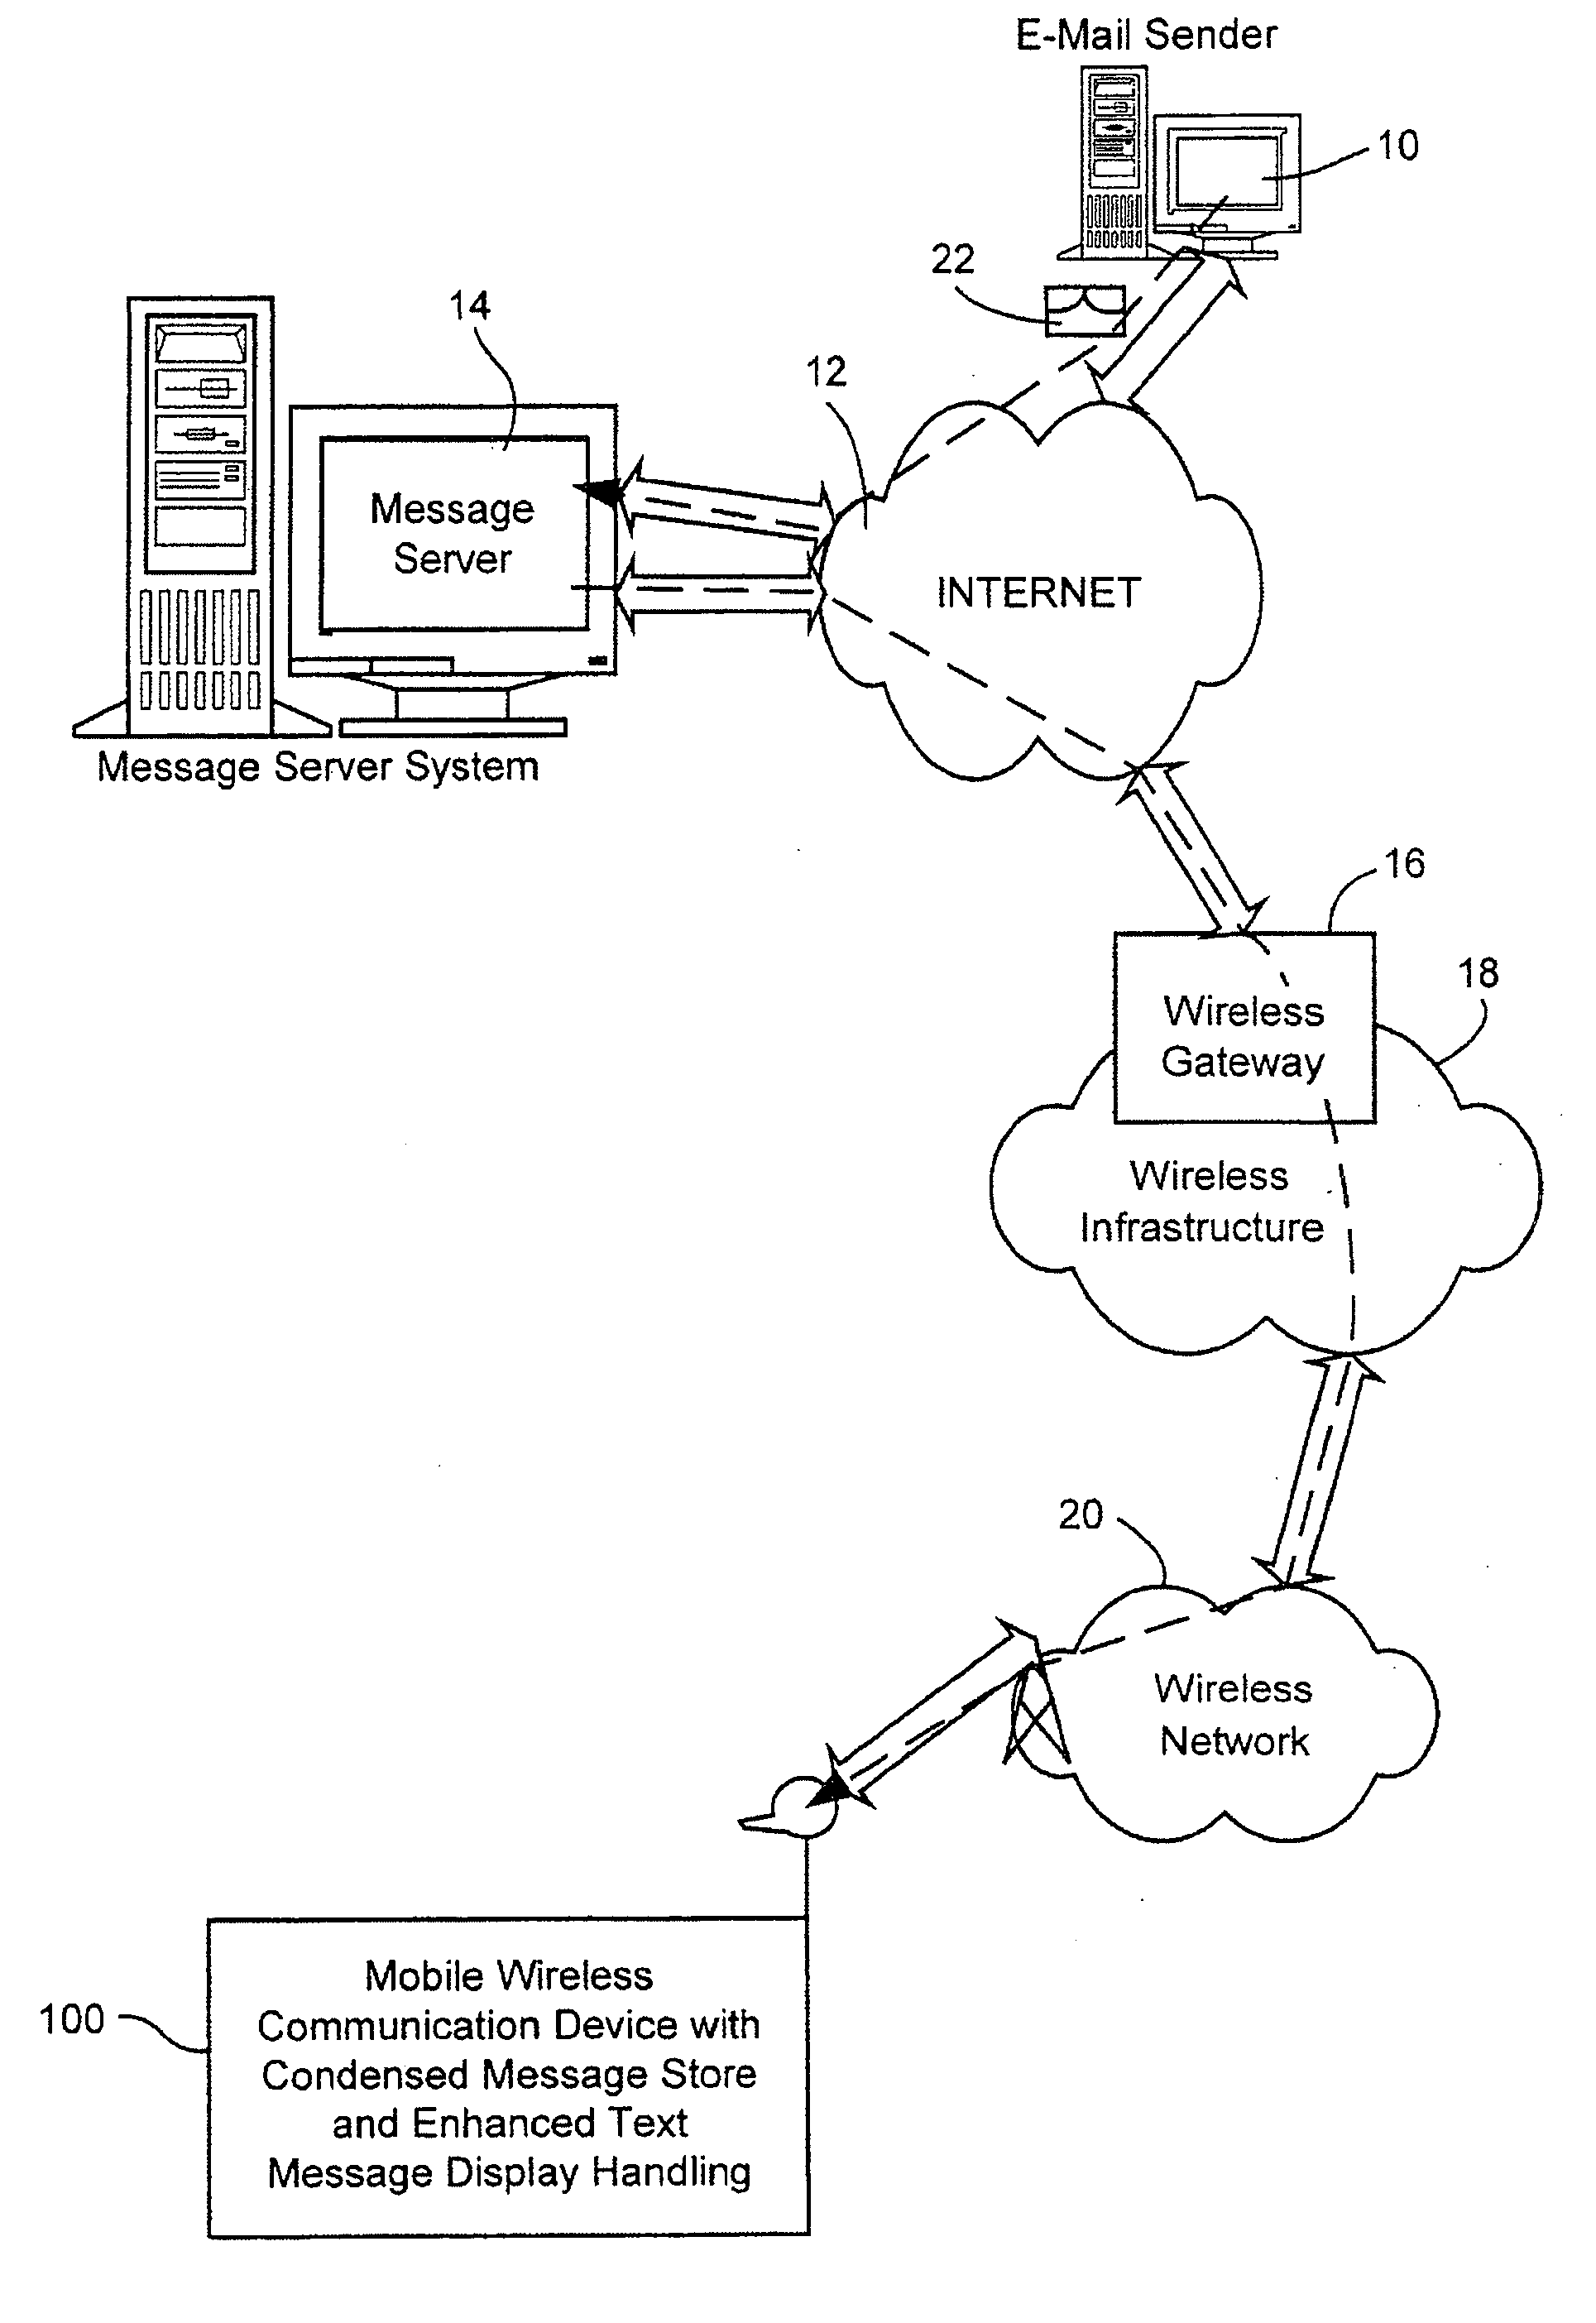 Storing, sending and receiving text message threads on a wireless communication device